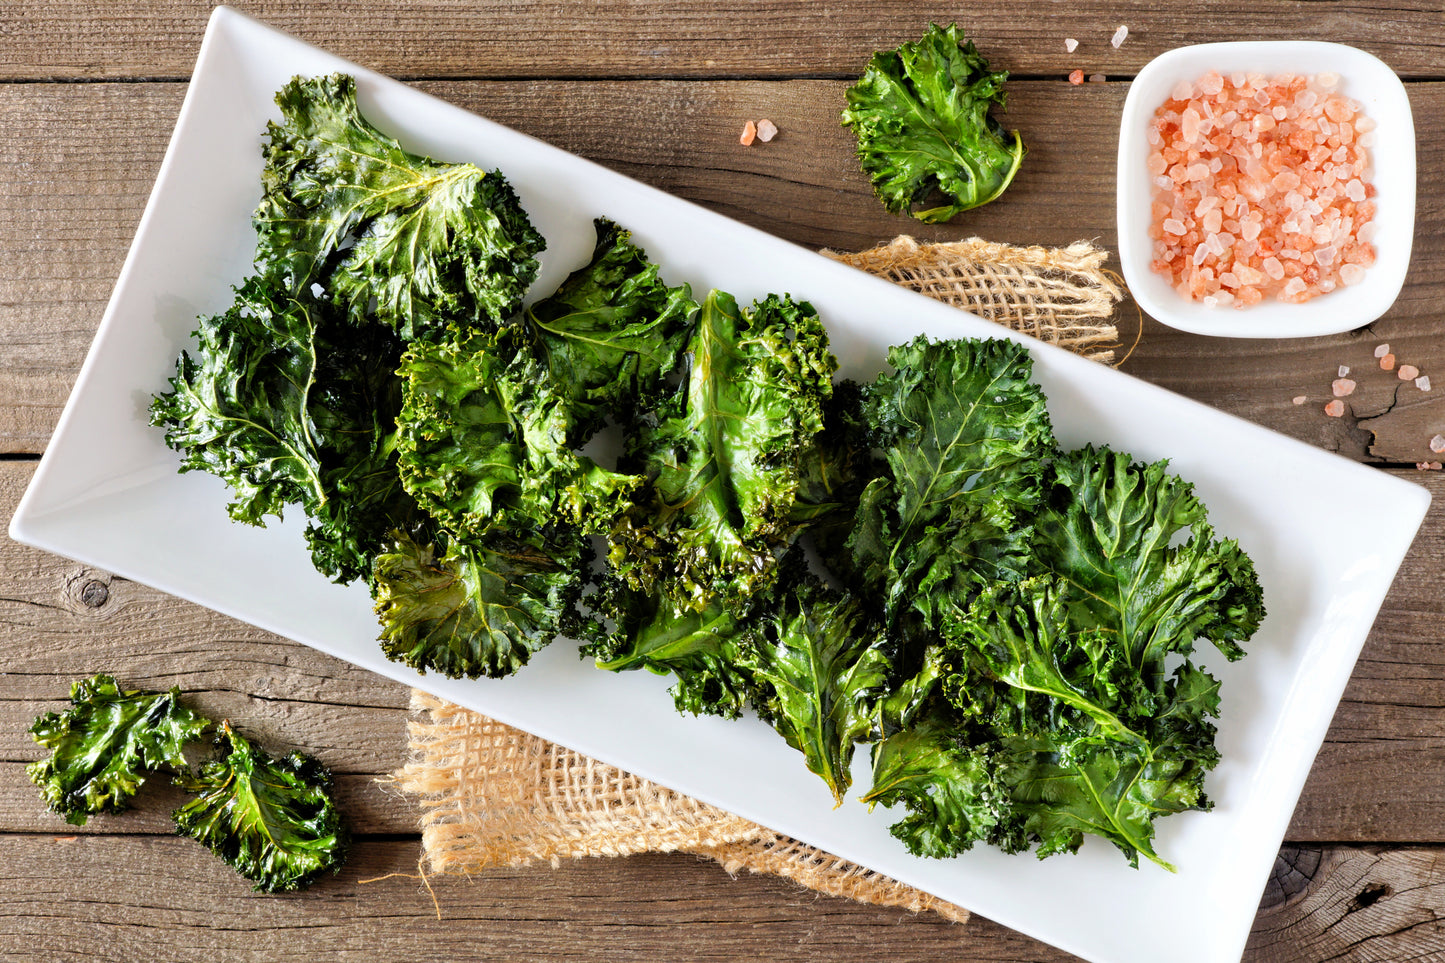 Spicy Kale Chips